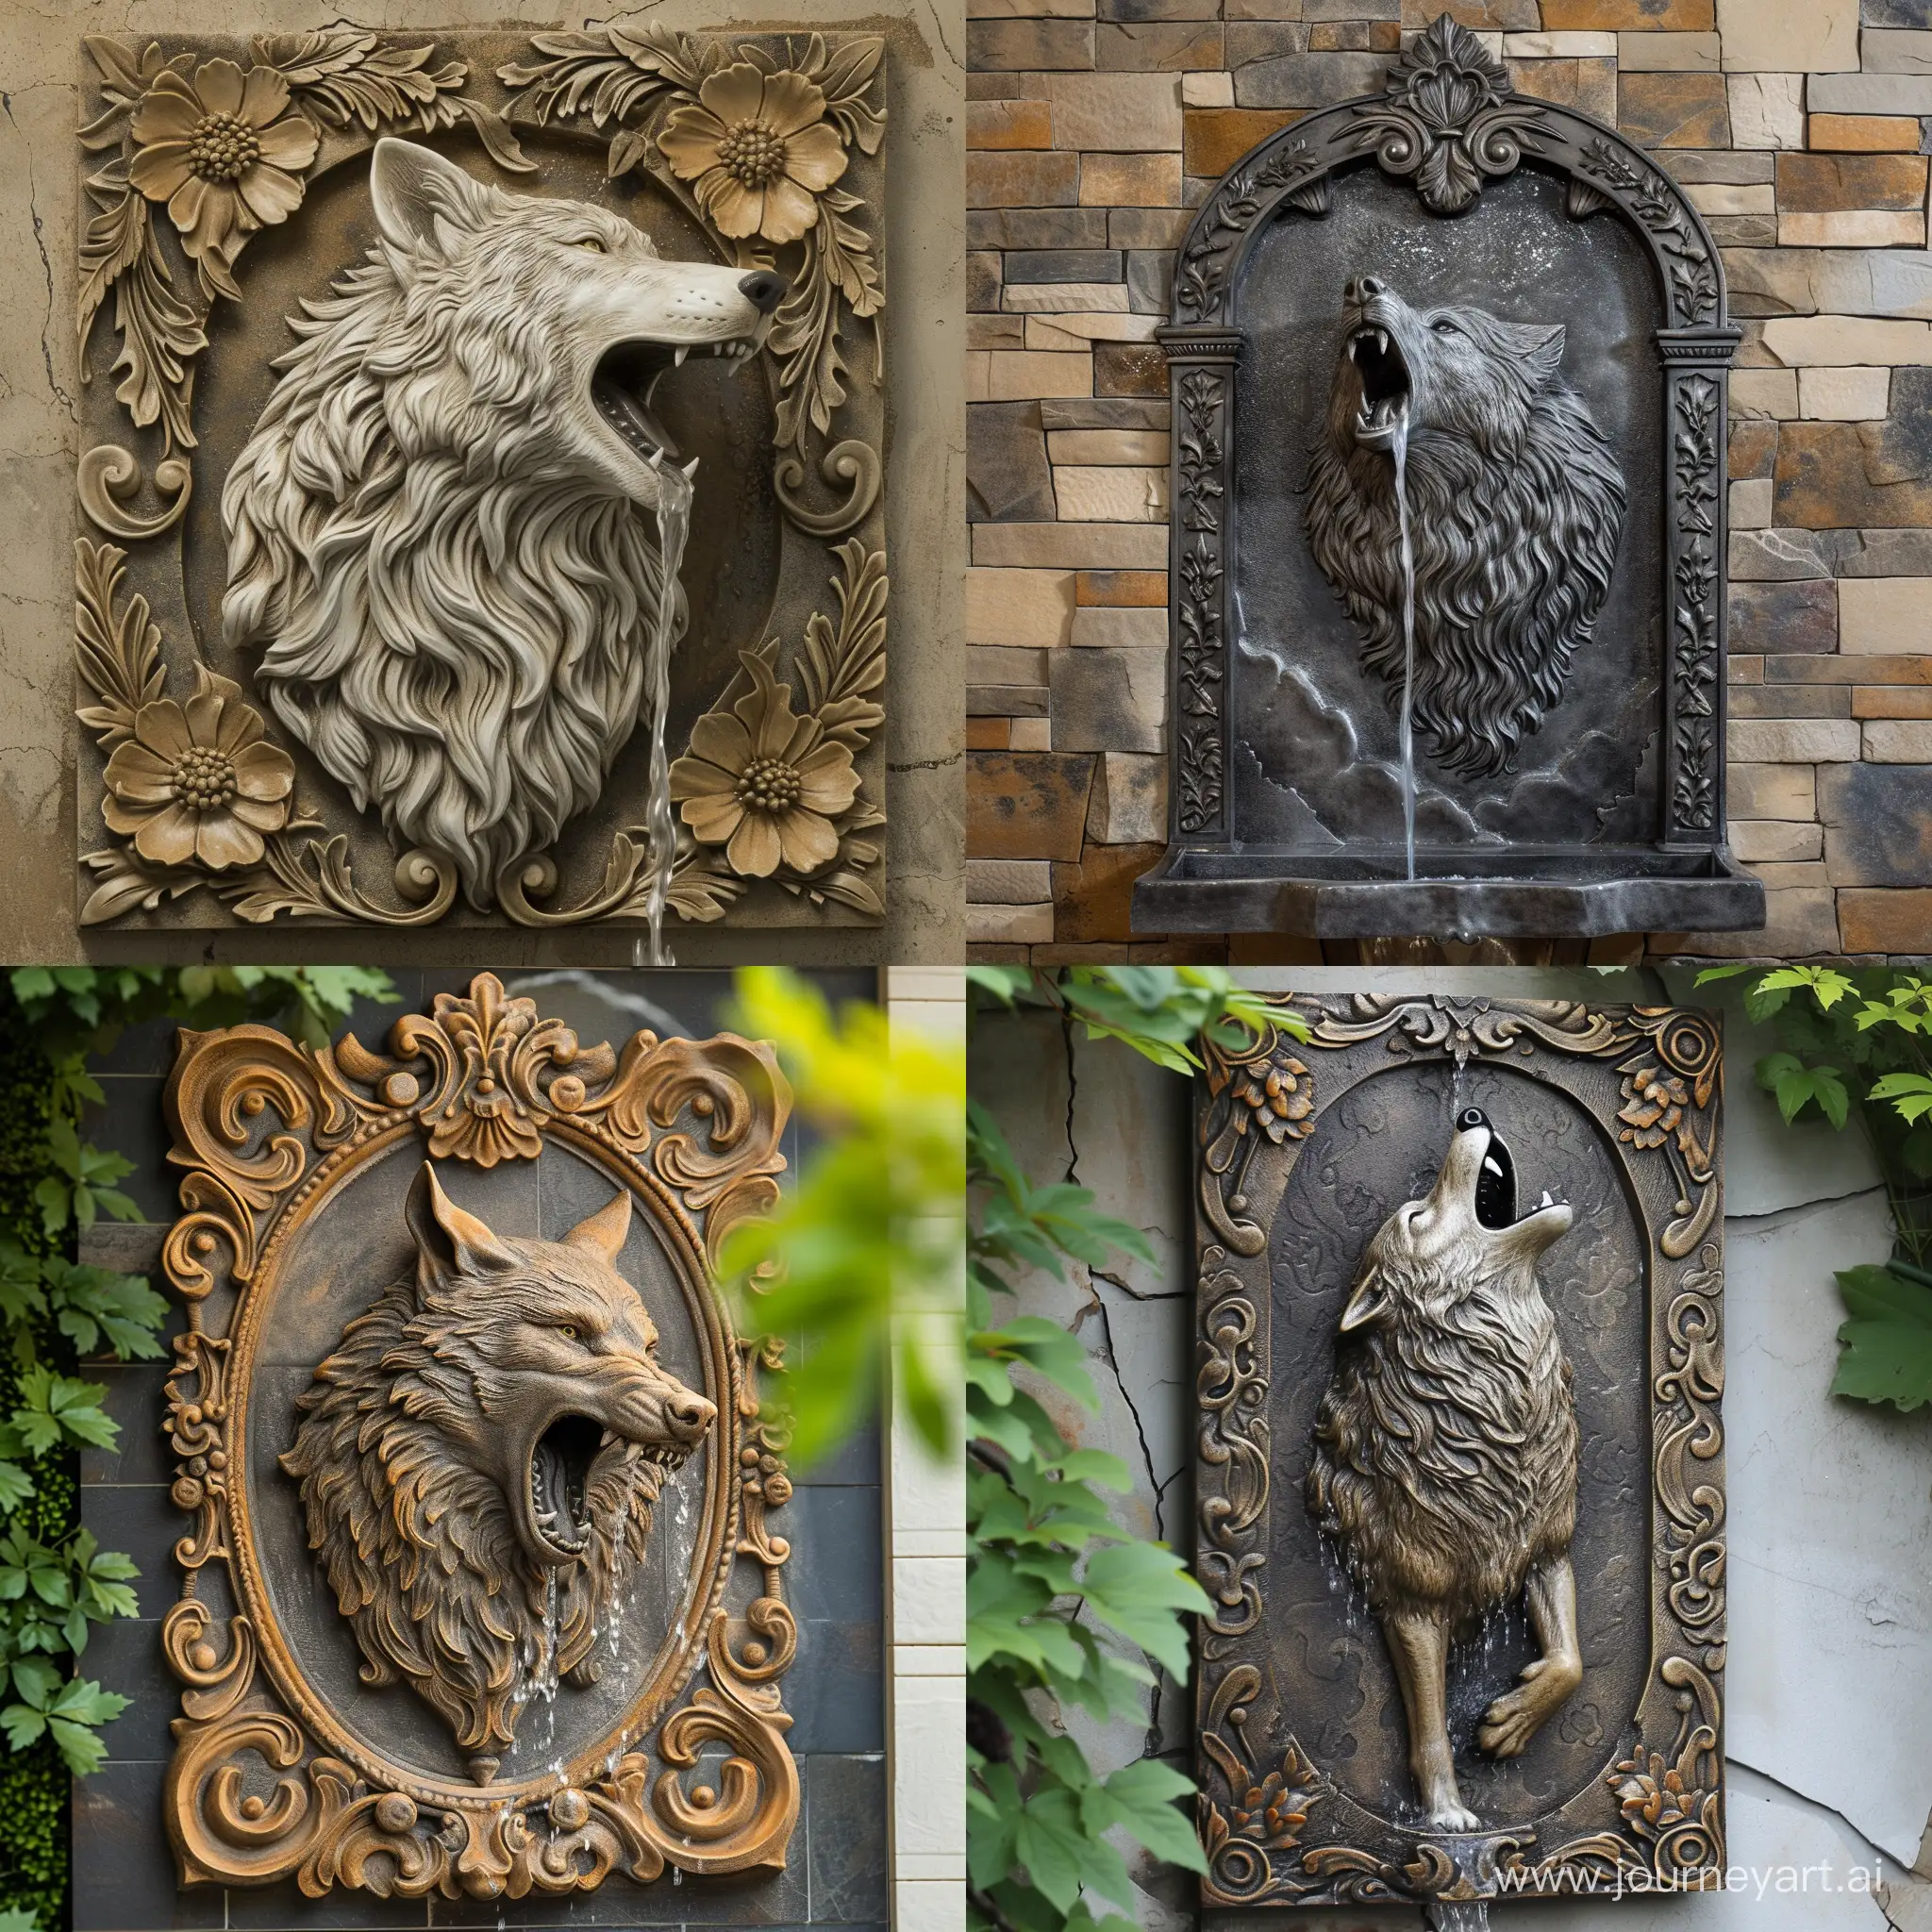 Majestic-Howling-Wolf-Baroque-Patterned-Wall-Fountain